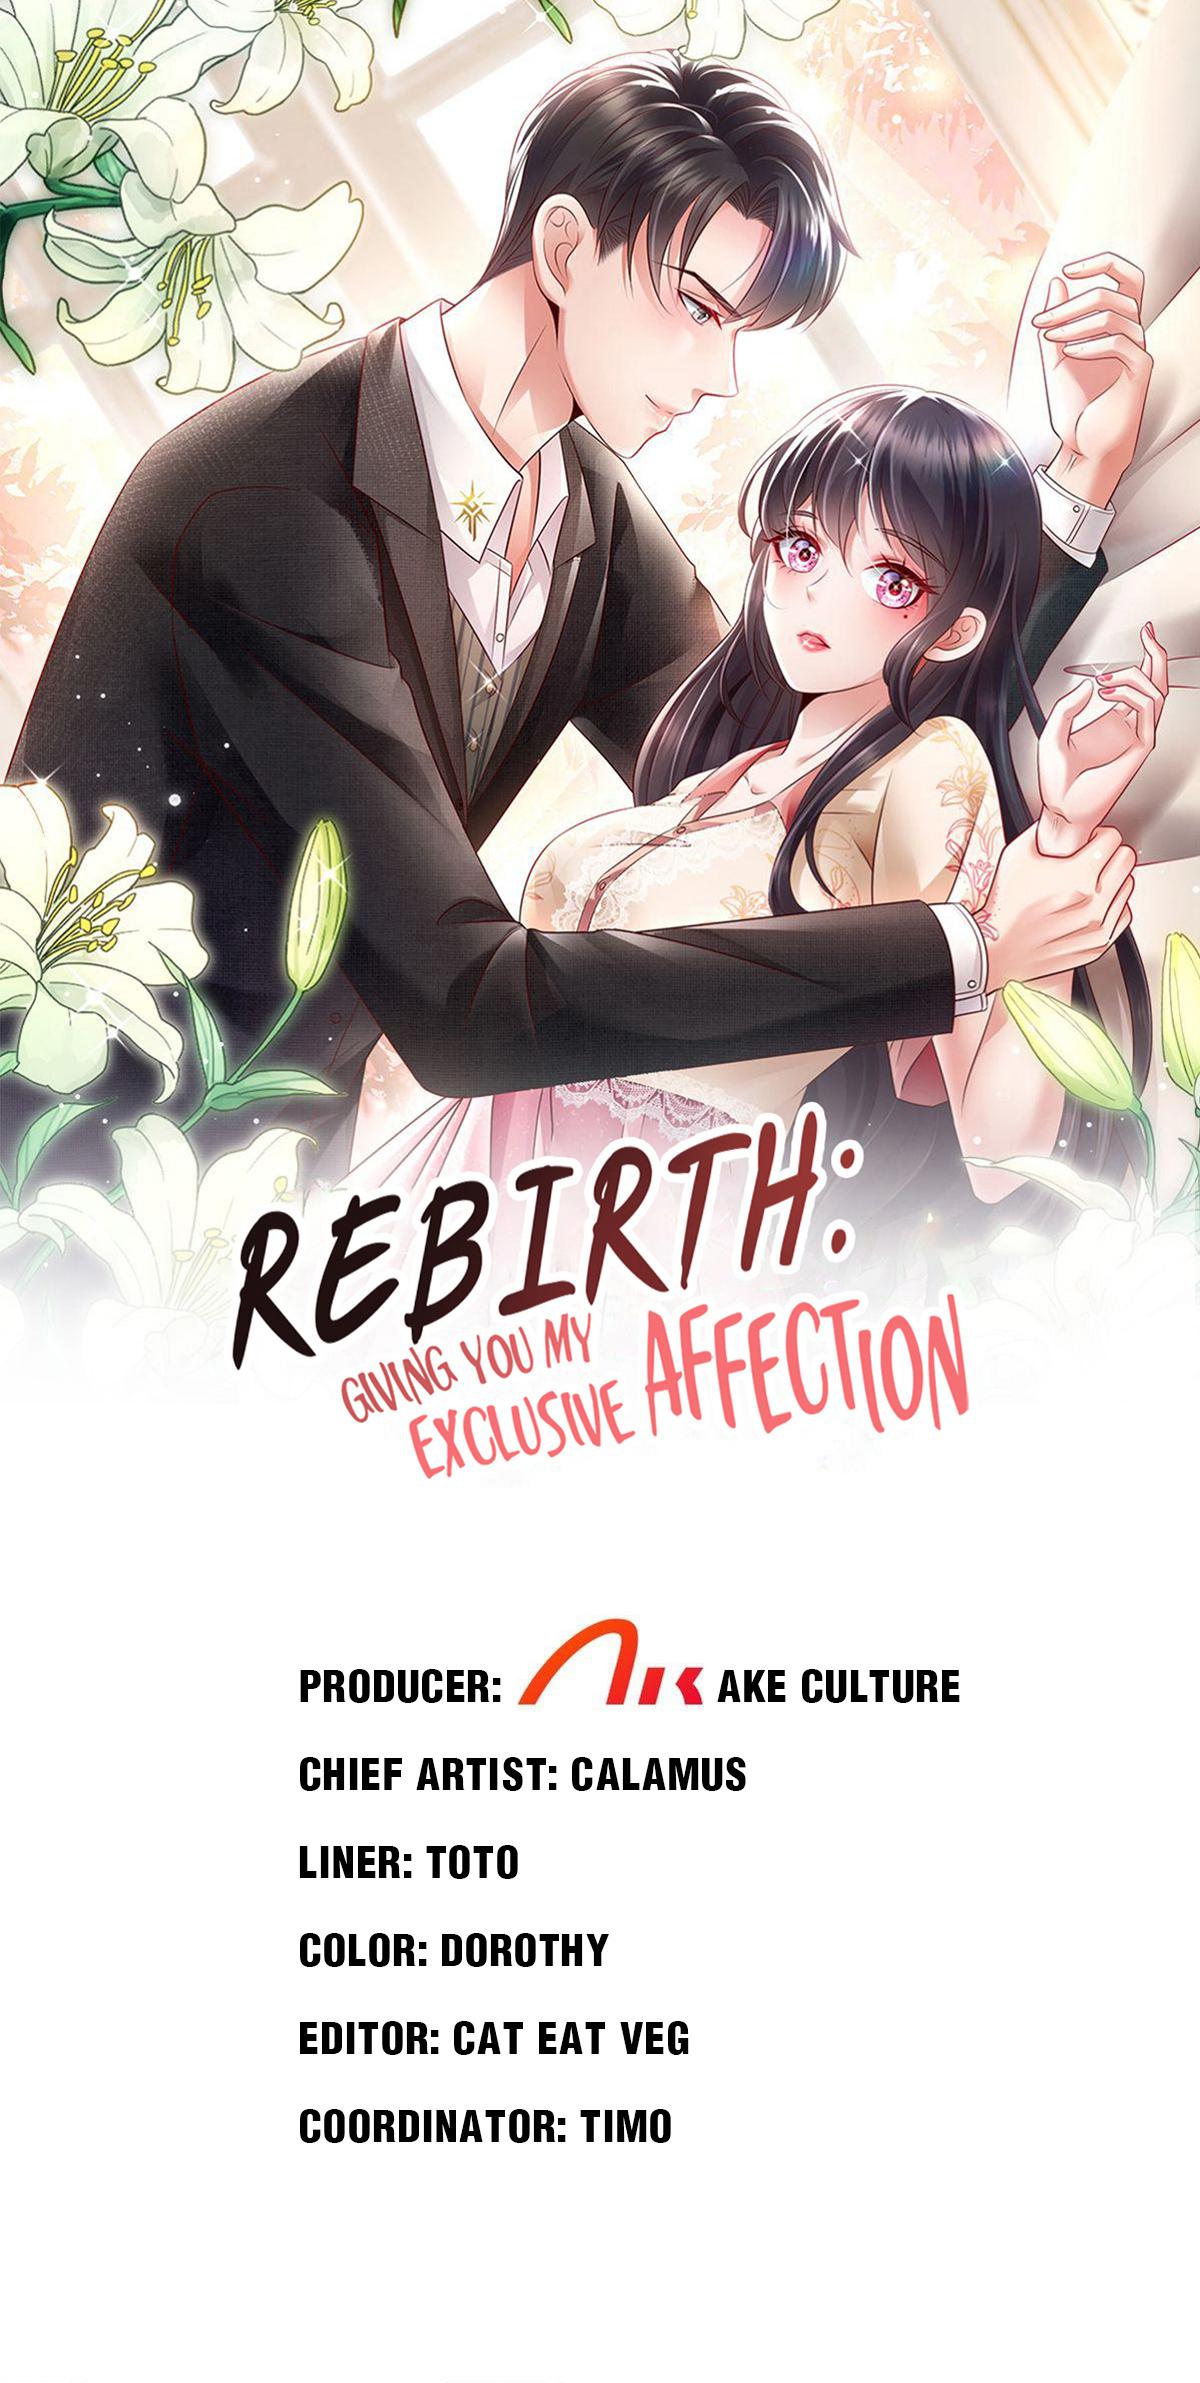 Rebirth: Giving You My Exclusive Affection 222